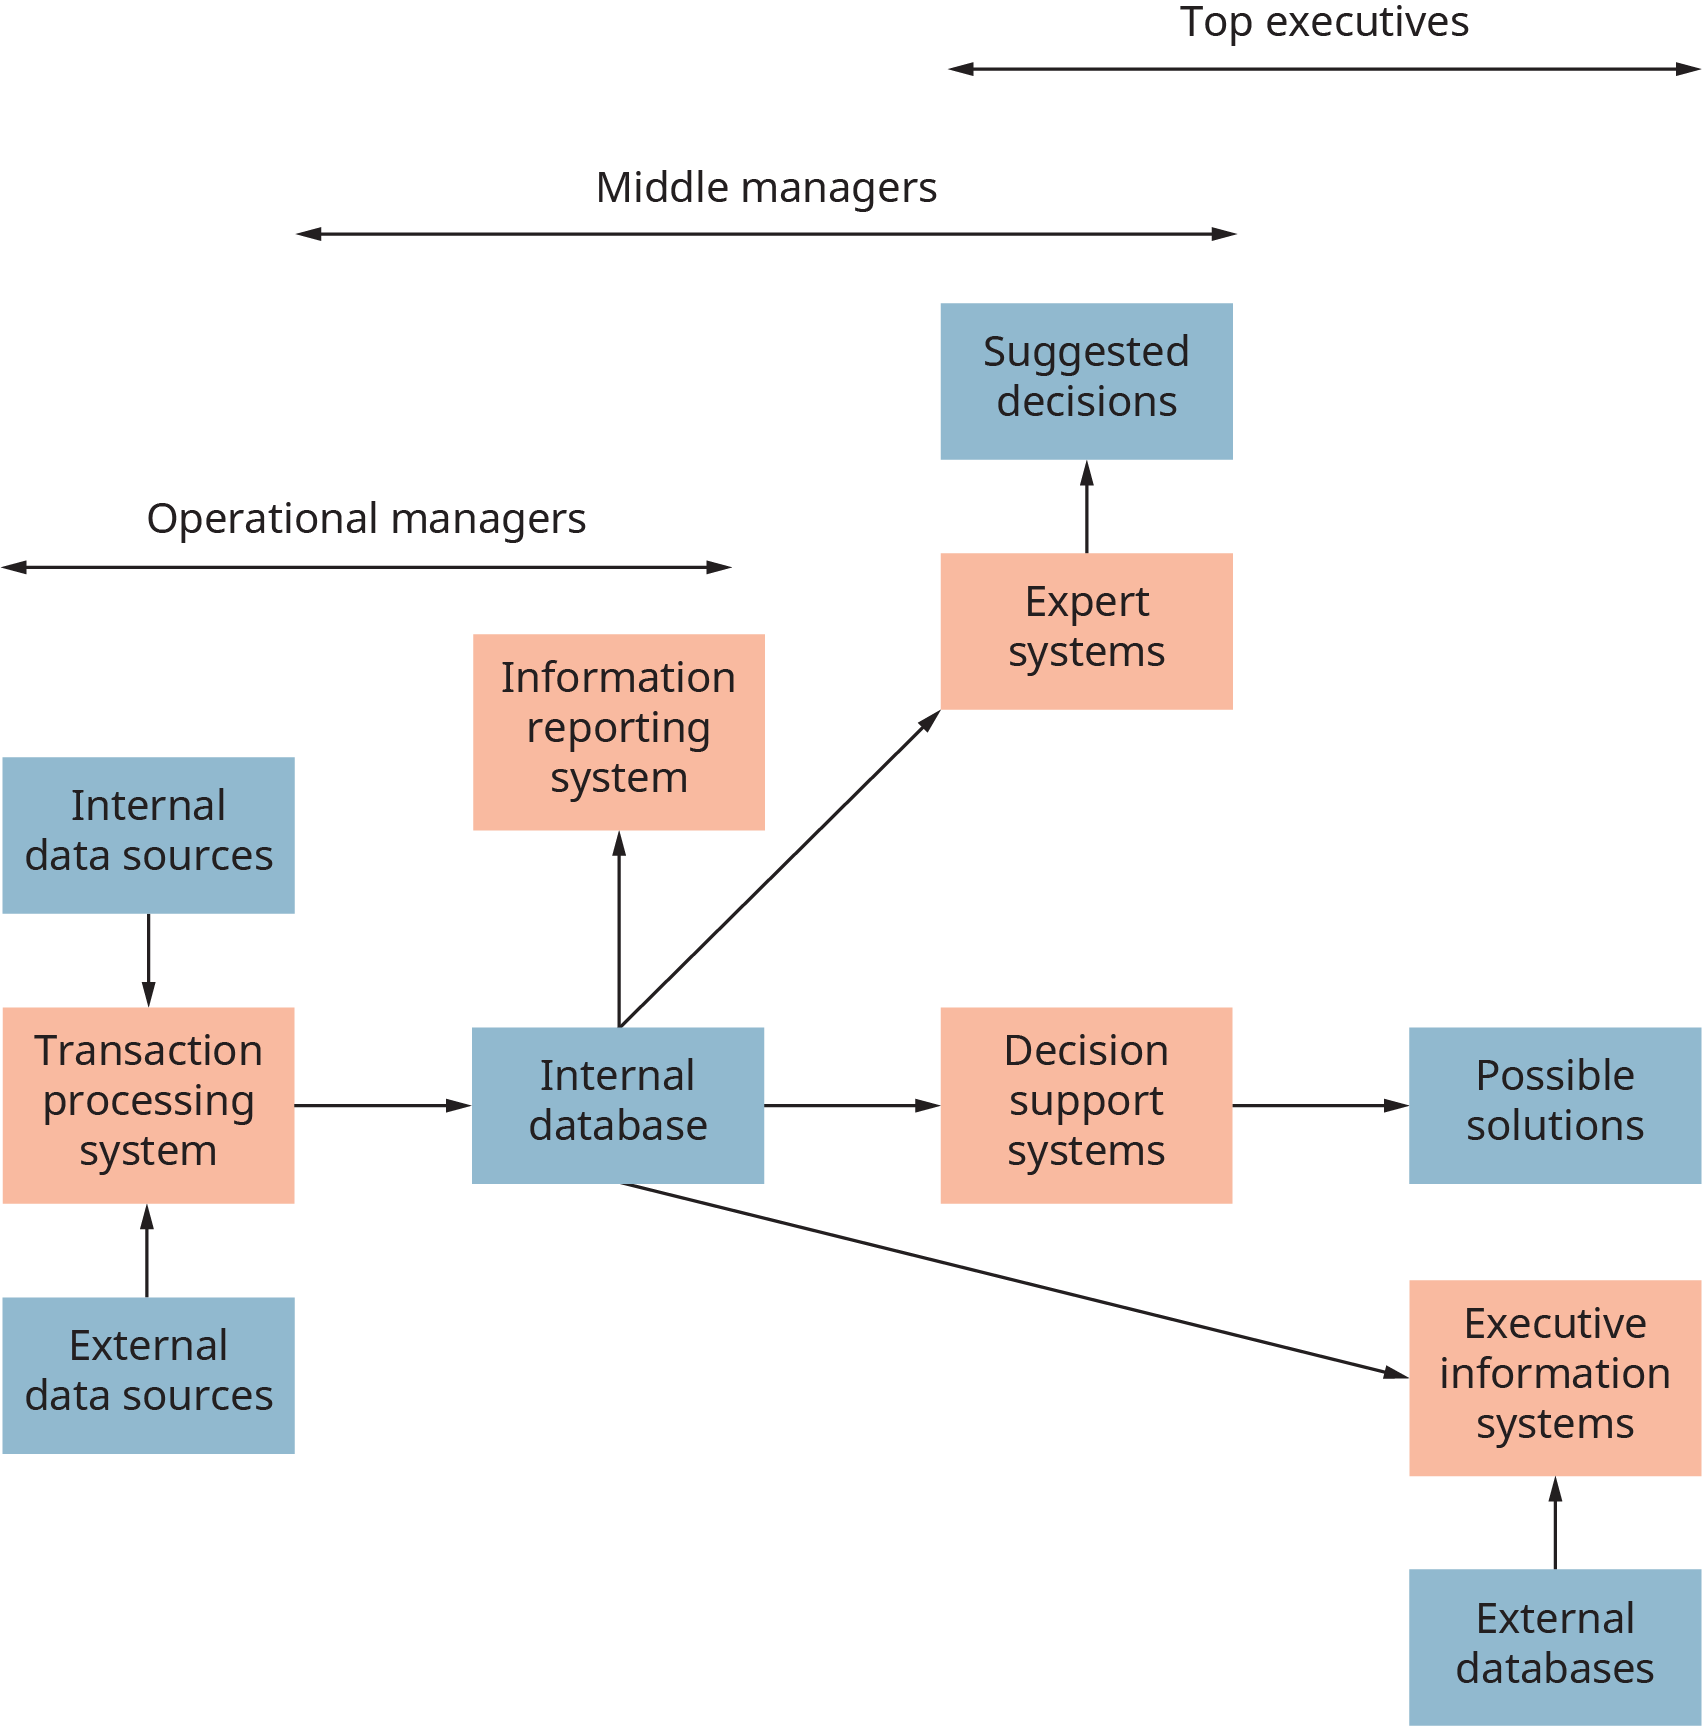 The Operational manager’s domain is where internal and external data sources flow into a transaction processing system. This flows into an internal data base, and now is in the overlap domain of operational managers and middle managers. There are 4 branches from the internal database. First, information reporting system. The next 3 branches are overlapped by middle managers and top executives. Second branch goes to expert systems, and to suggested decisions. Third branch goes to decision support, then to possible solutions, under top executives only. The fourth branch goes to executive information systems, which are fed by external databases, and are top executive domain.